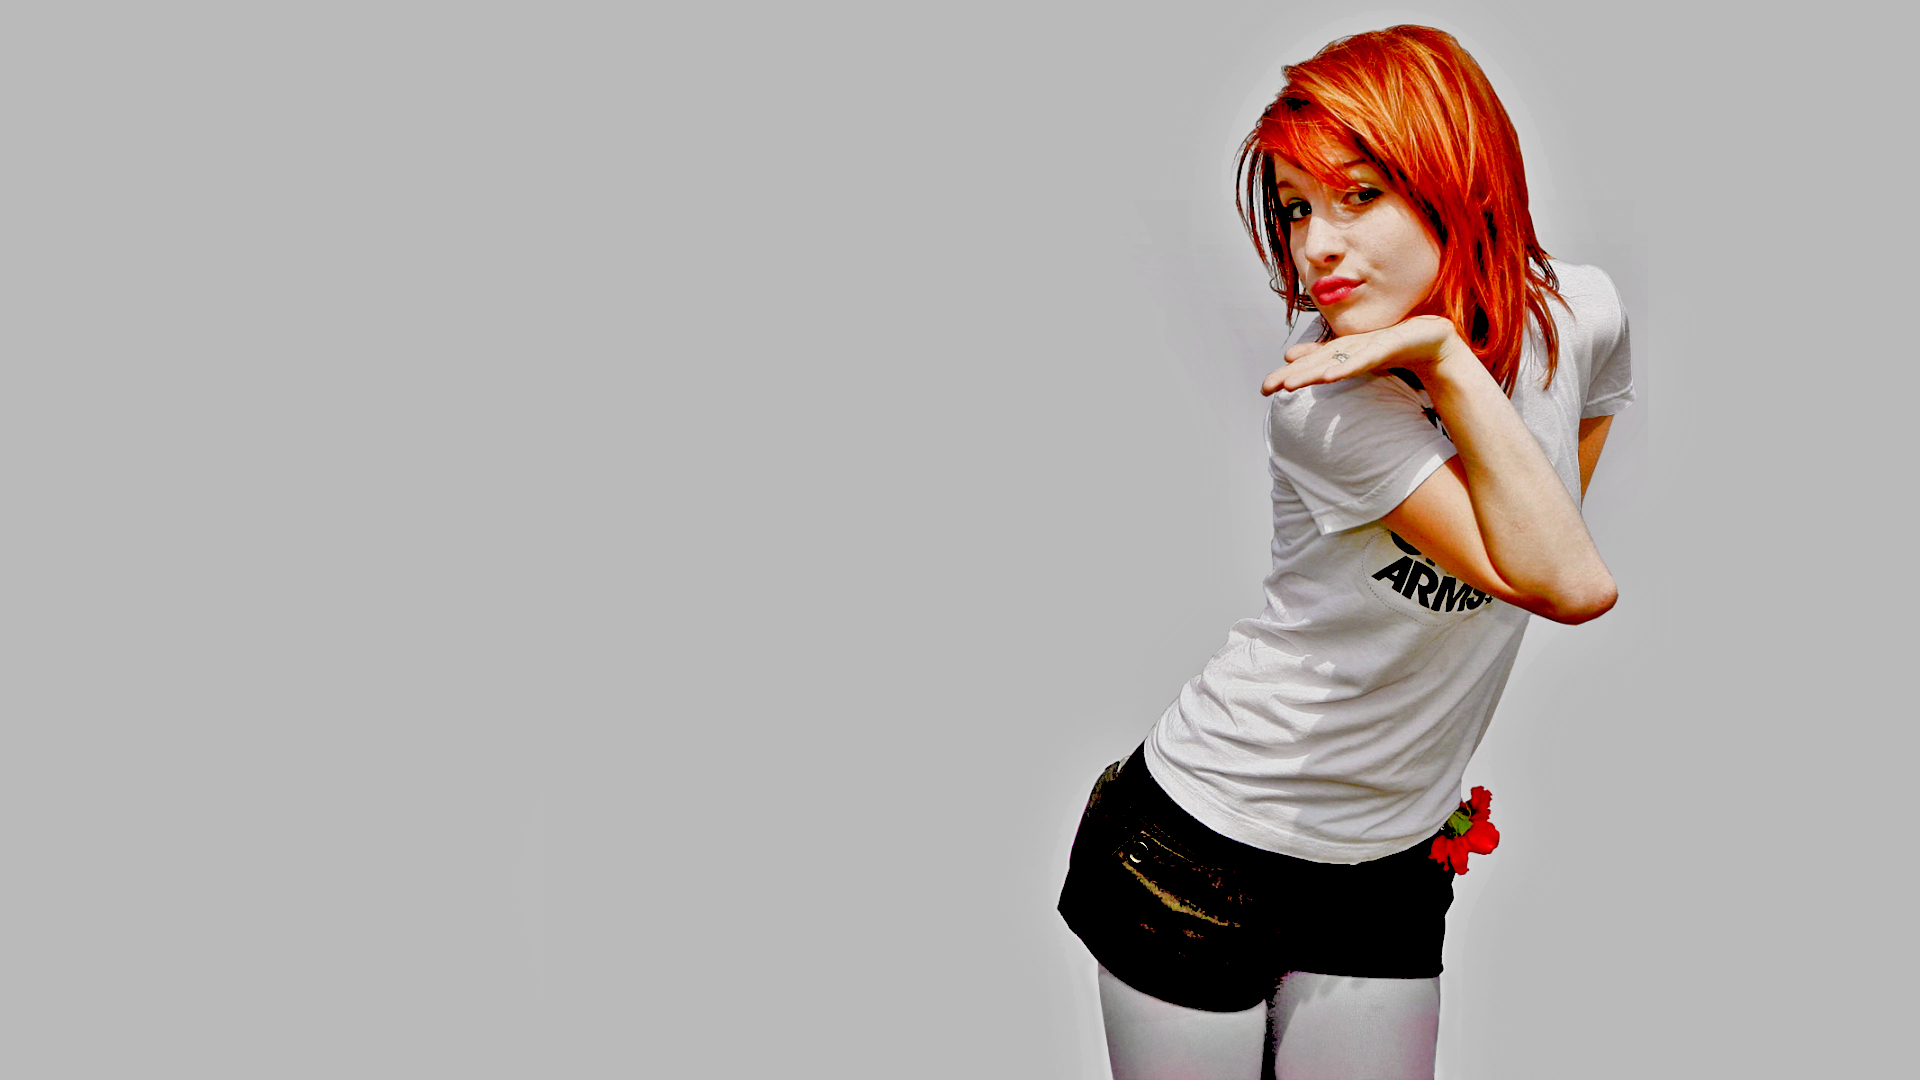 Hayley Williams Pictures